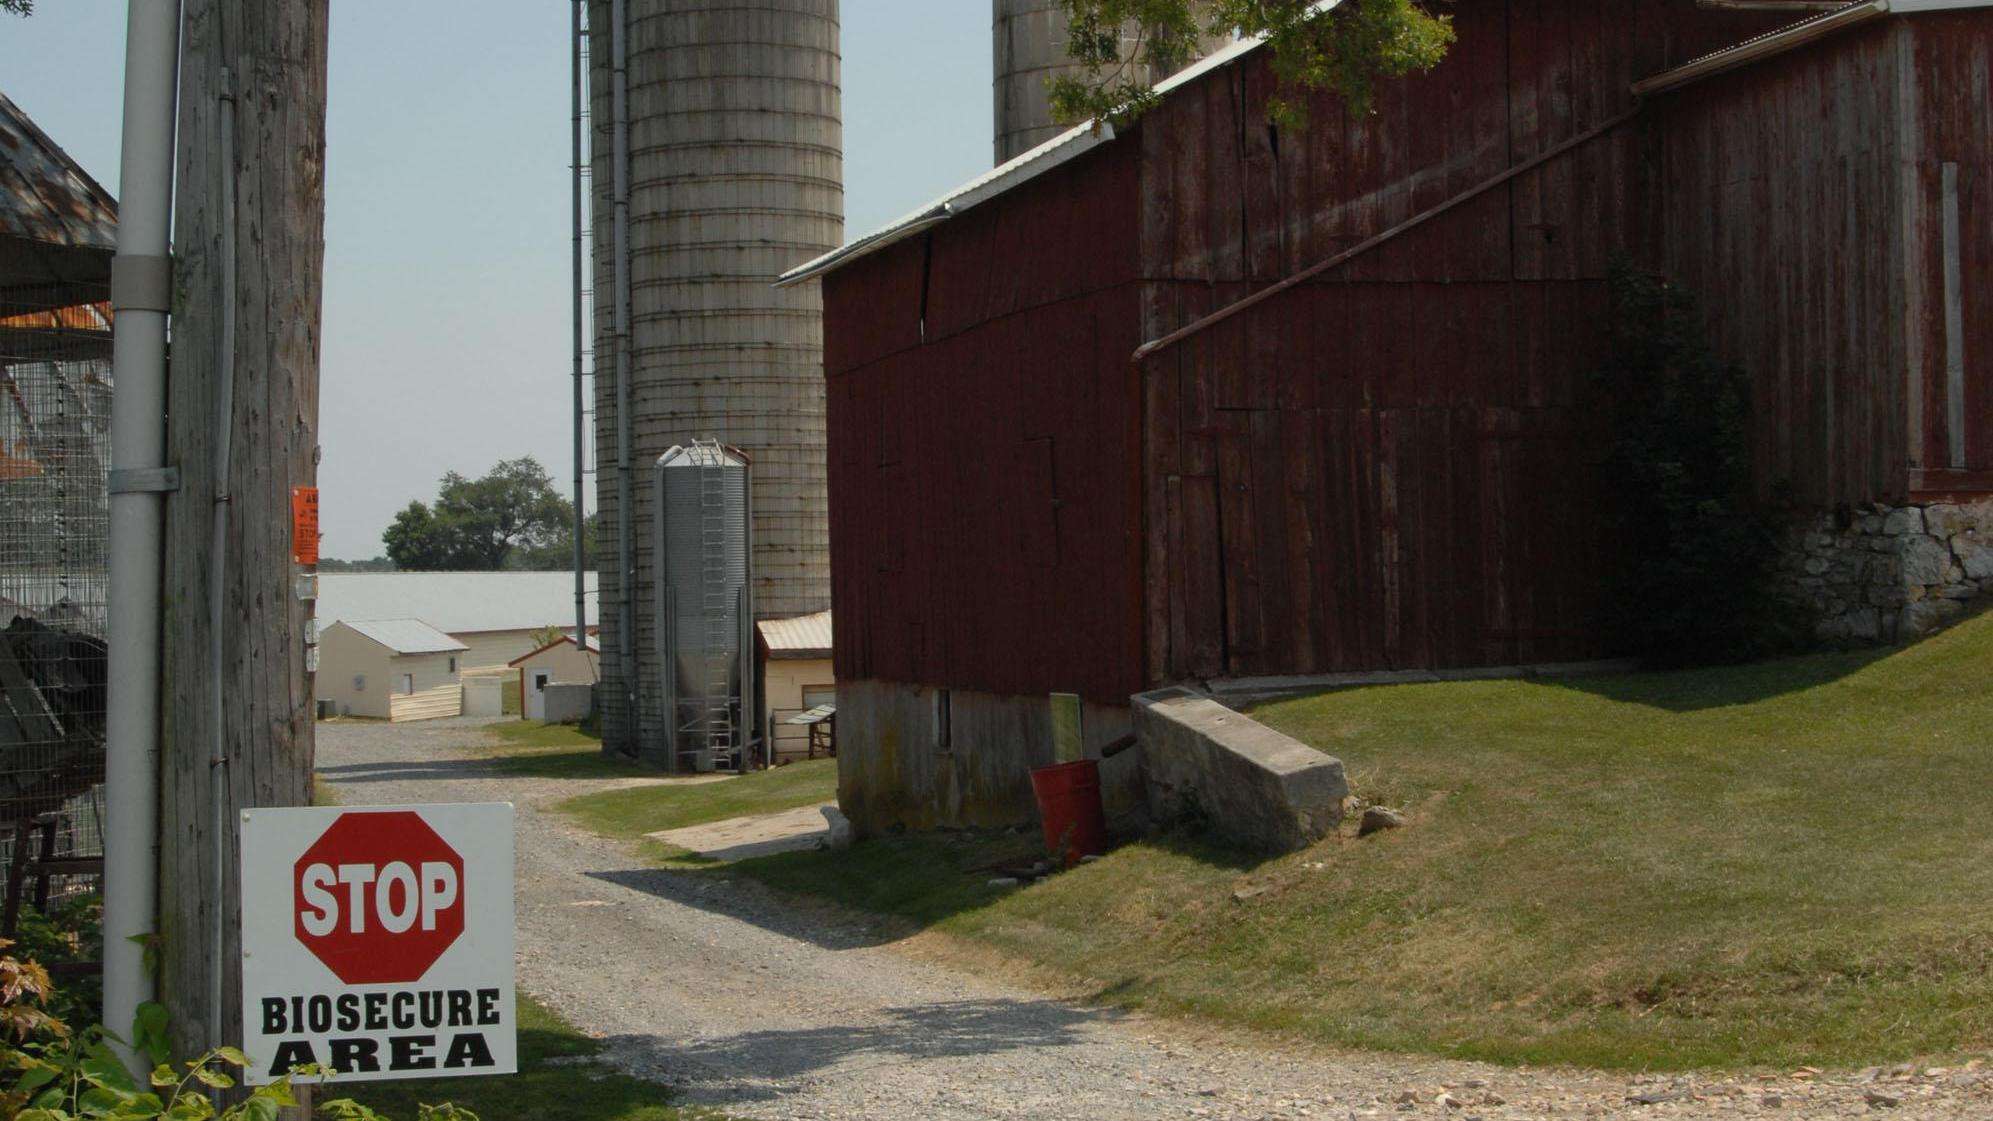 "Stop: Biosecure Area" sign next to a driveway at the entrance to a farm